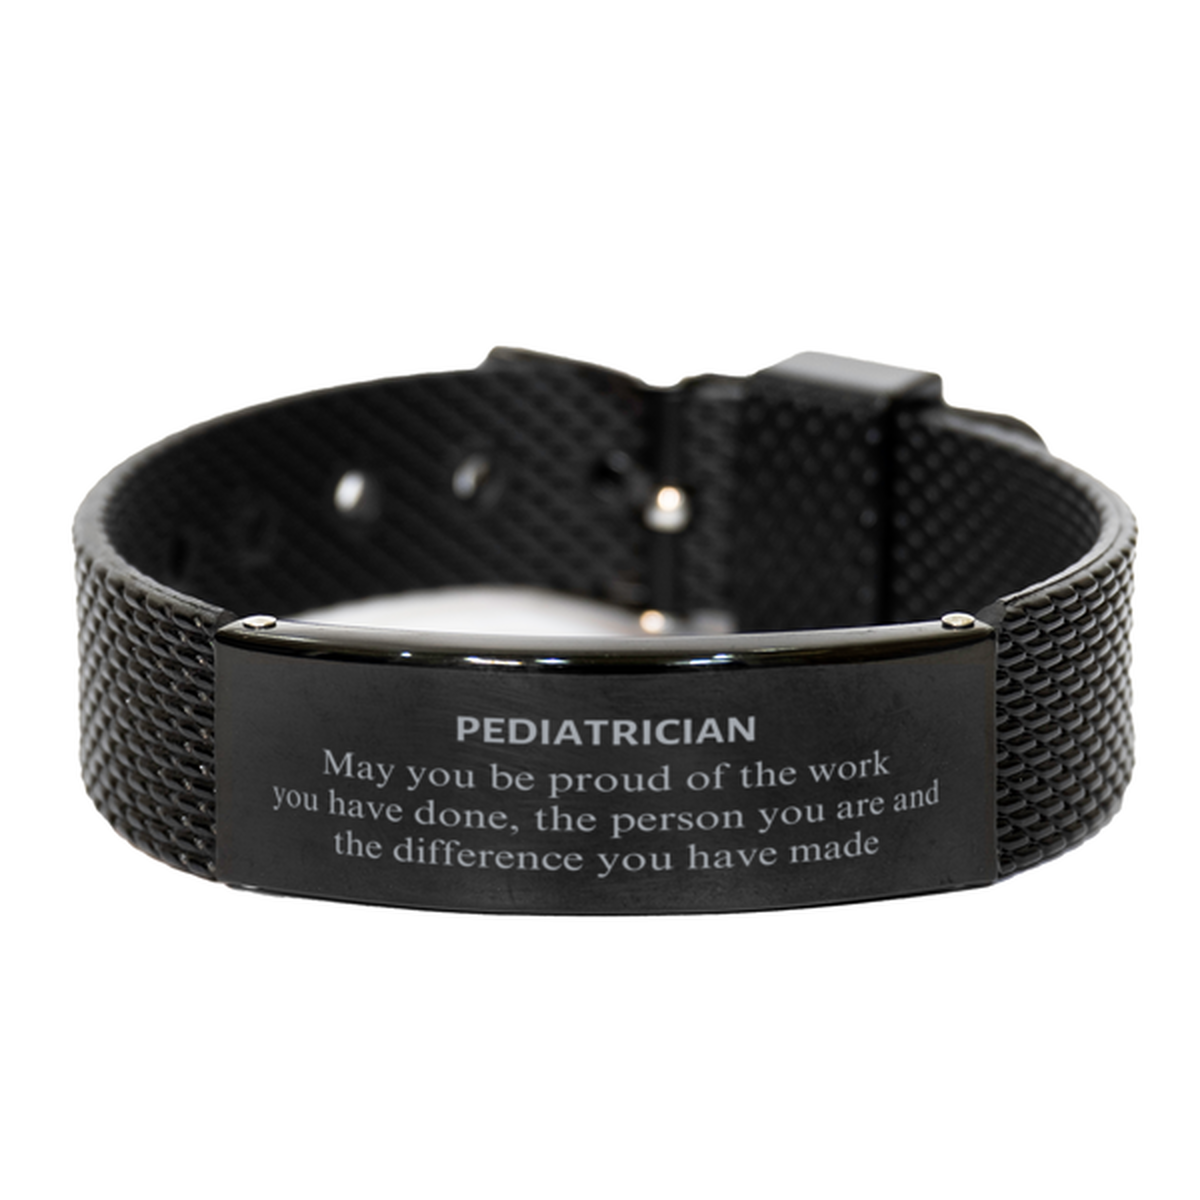 Pediatrician May you be proud of the work you have done, Retirement Pediatrician Black Shark Mesh Bracelet for Colleague Appreciation Gifts Amazing for Pediatrician